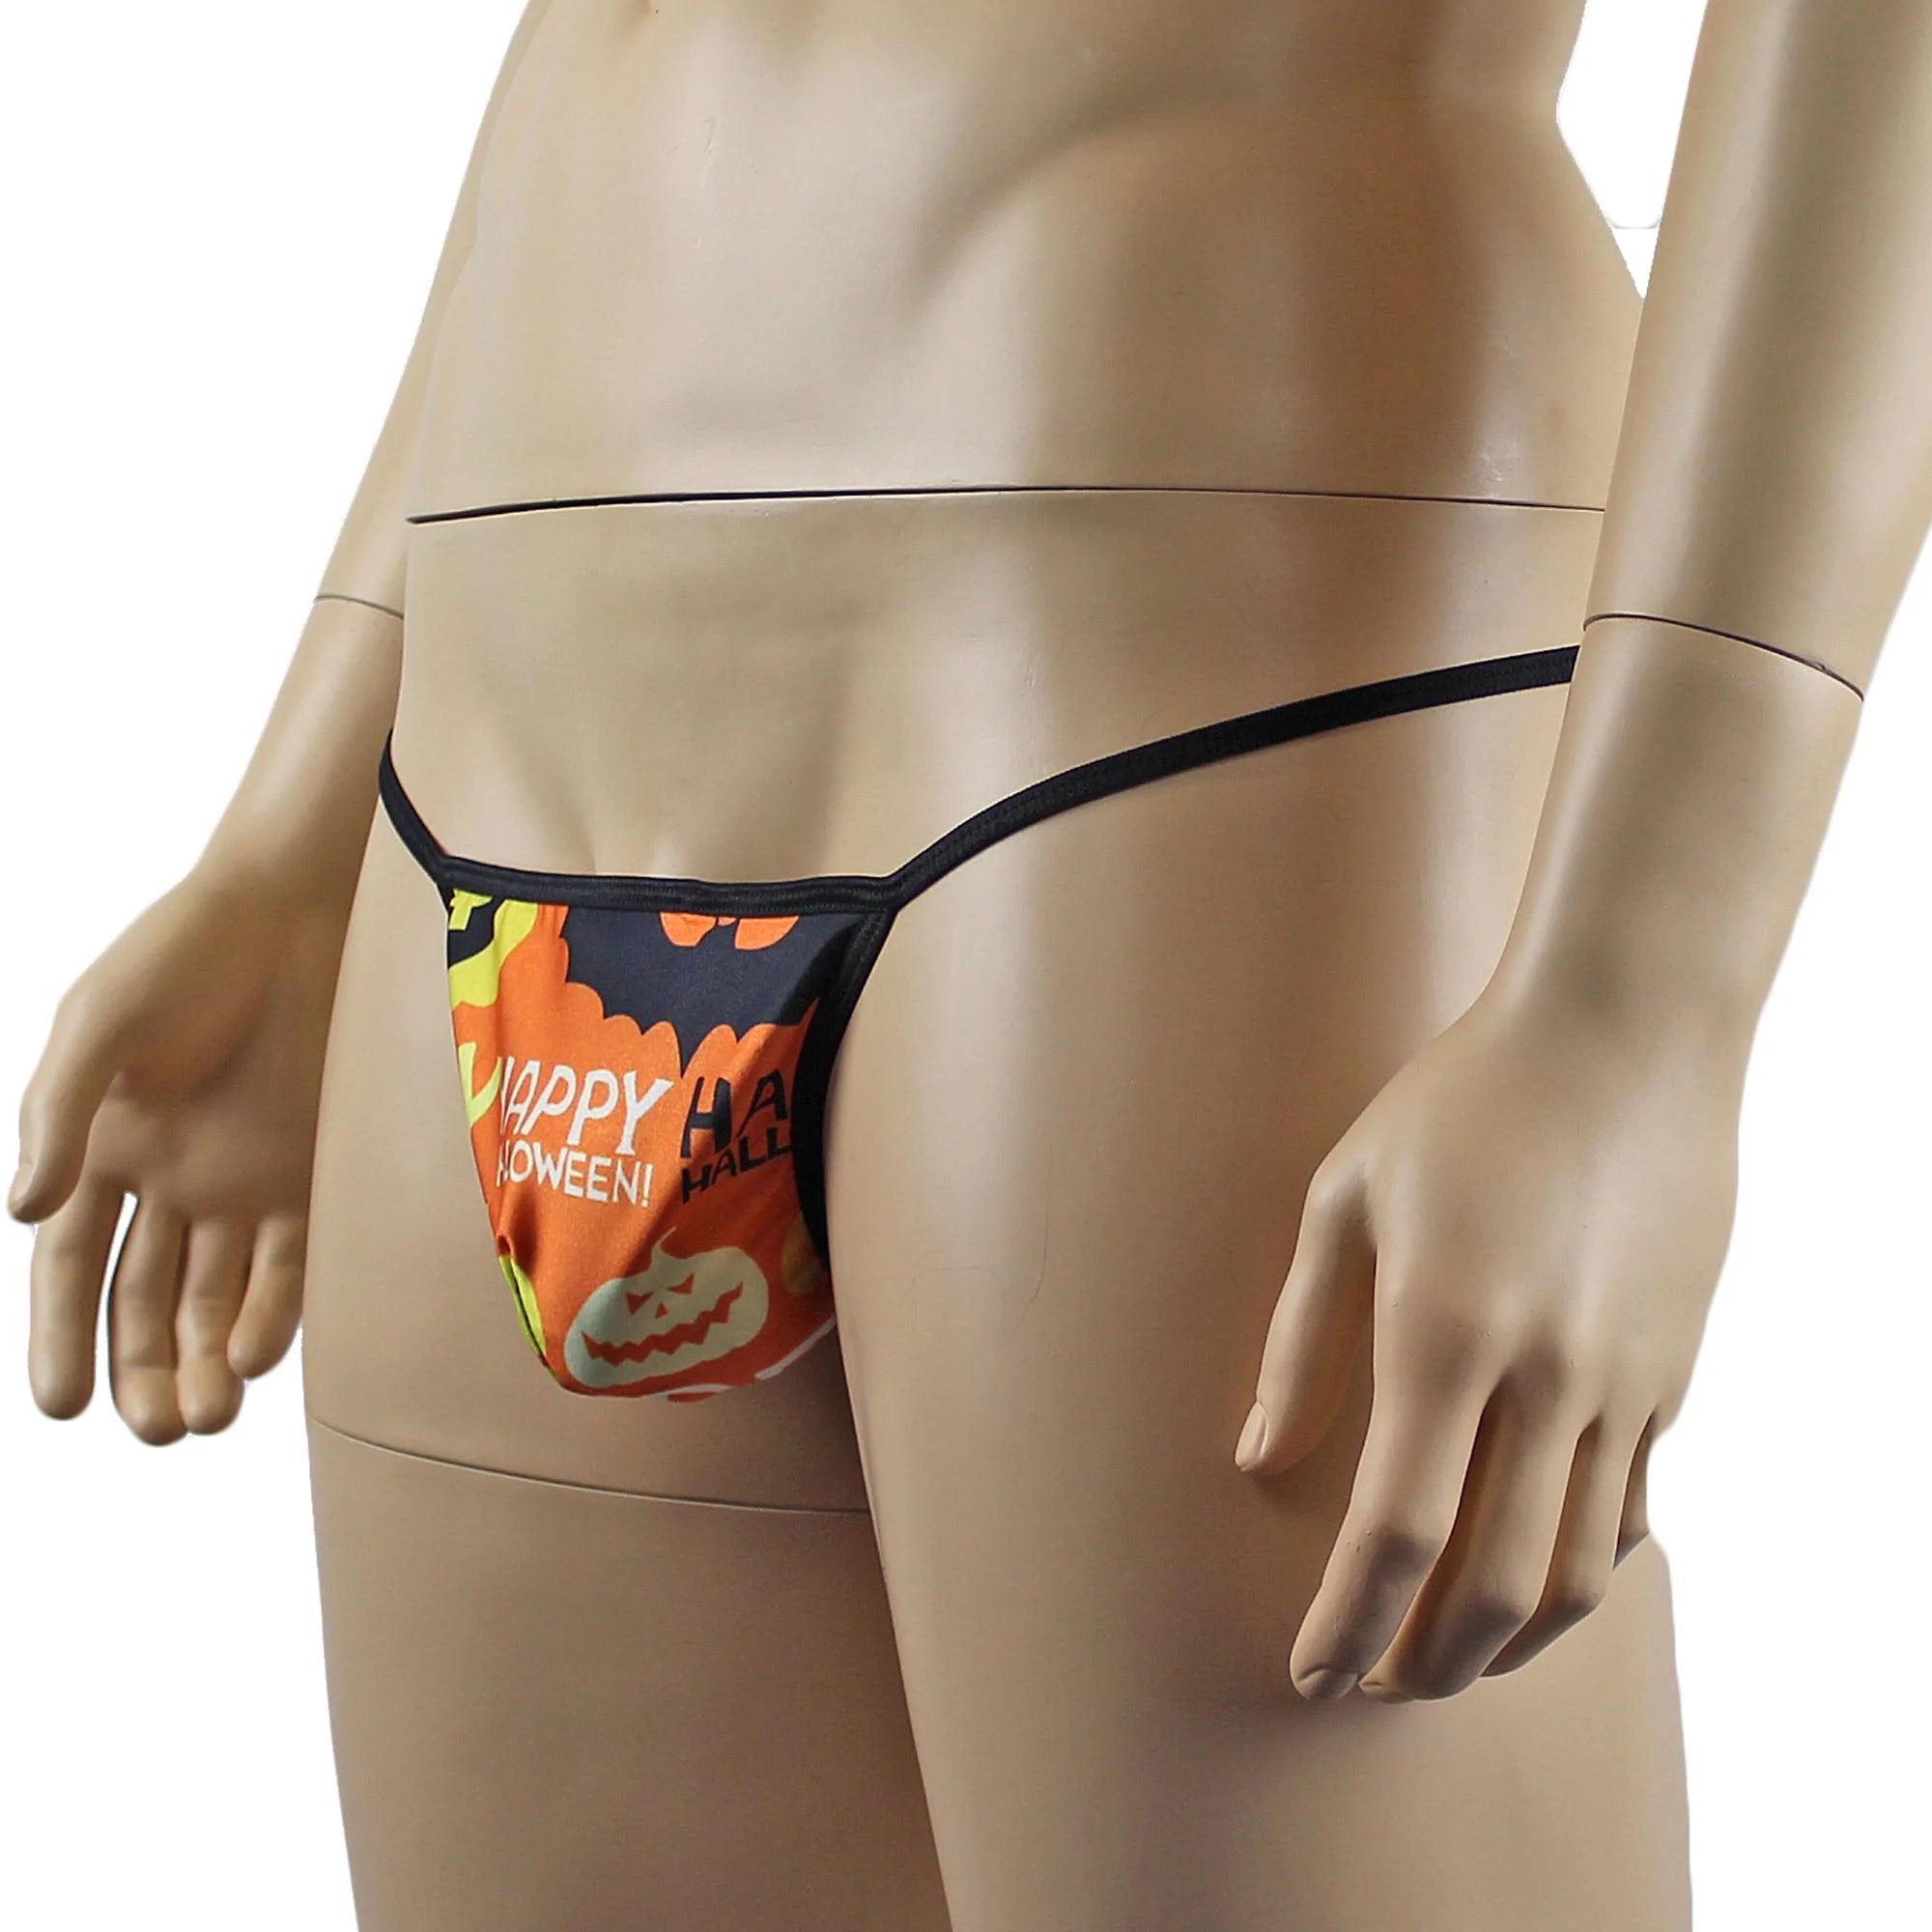 SALE - Mens Happy Halloween Pouch G string